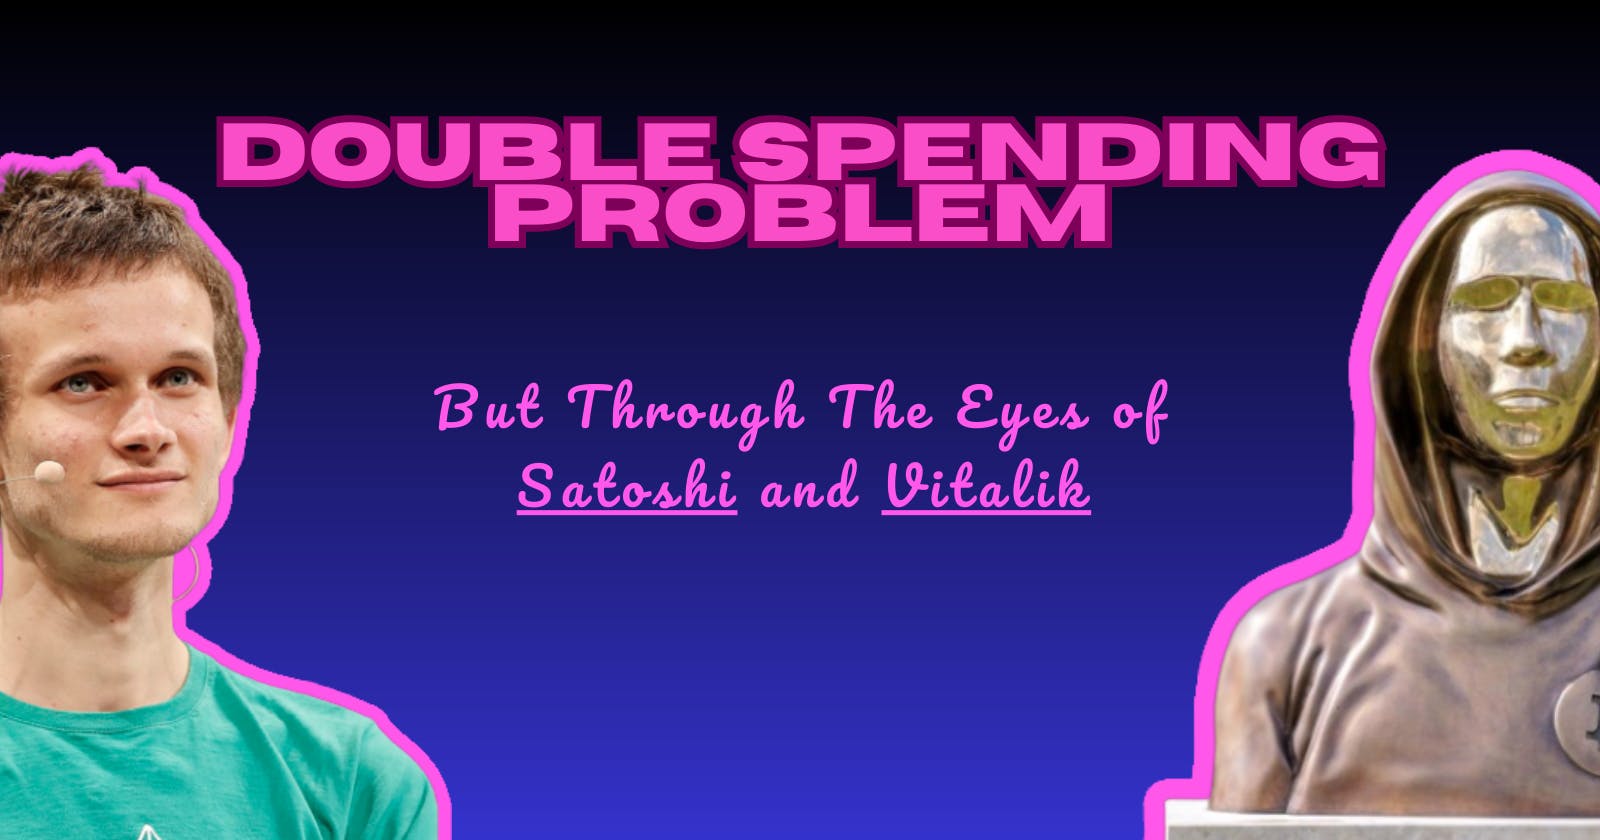 Double Spending Problem But Through The Eyes of  Satoshi and Vitalik